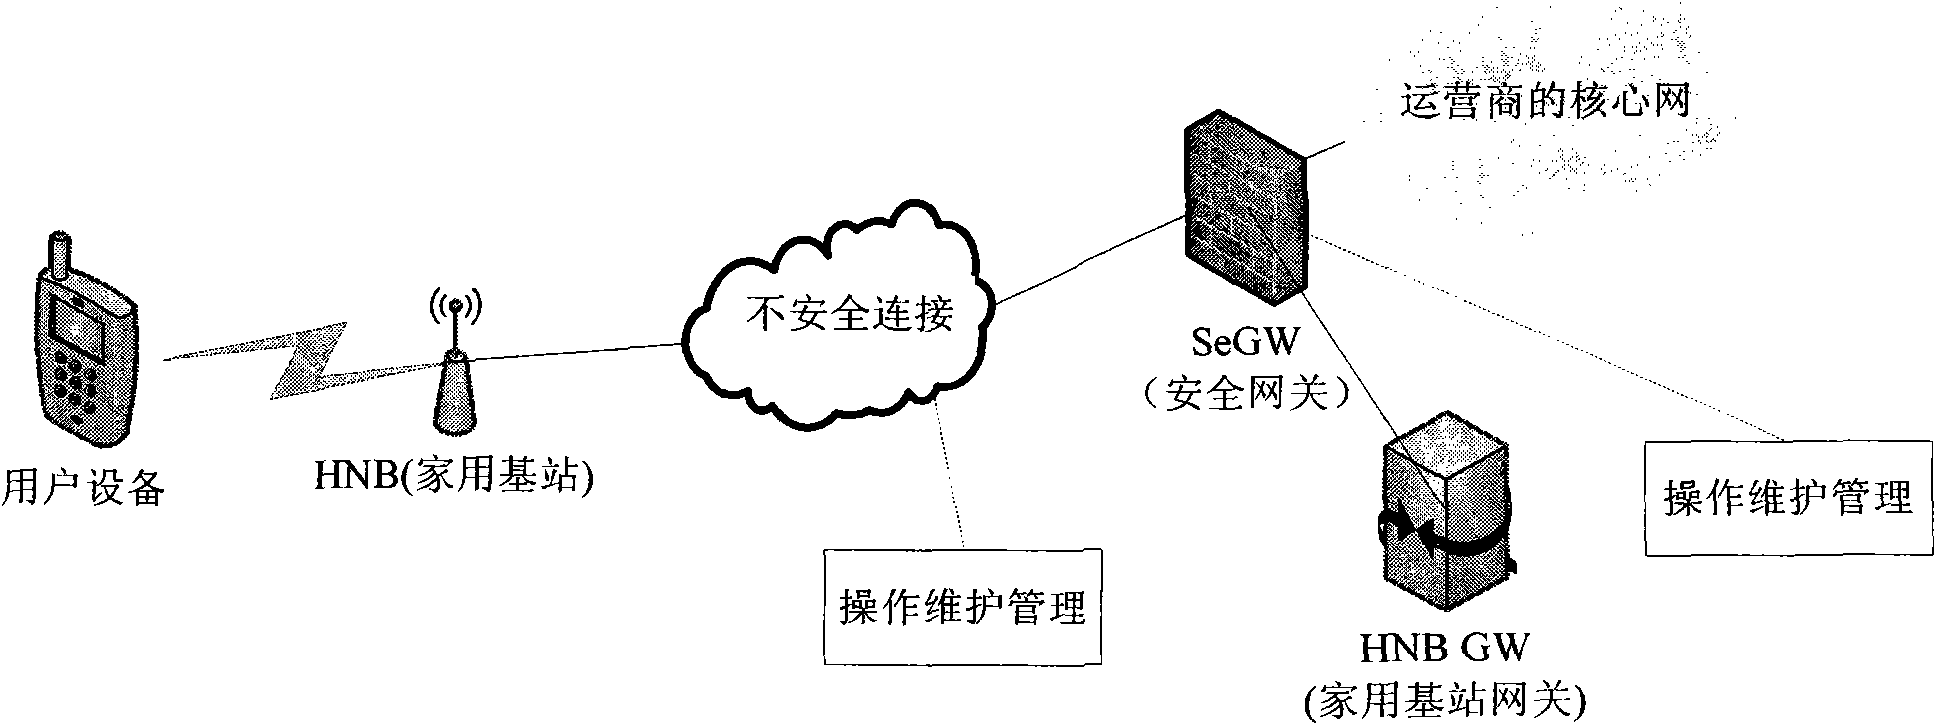 System and method for determining IP address of network equipment using network address translation